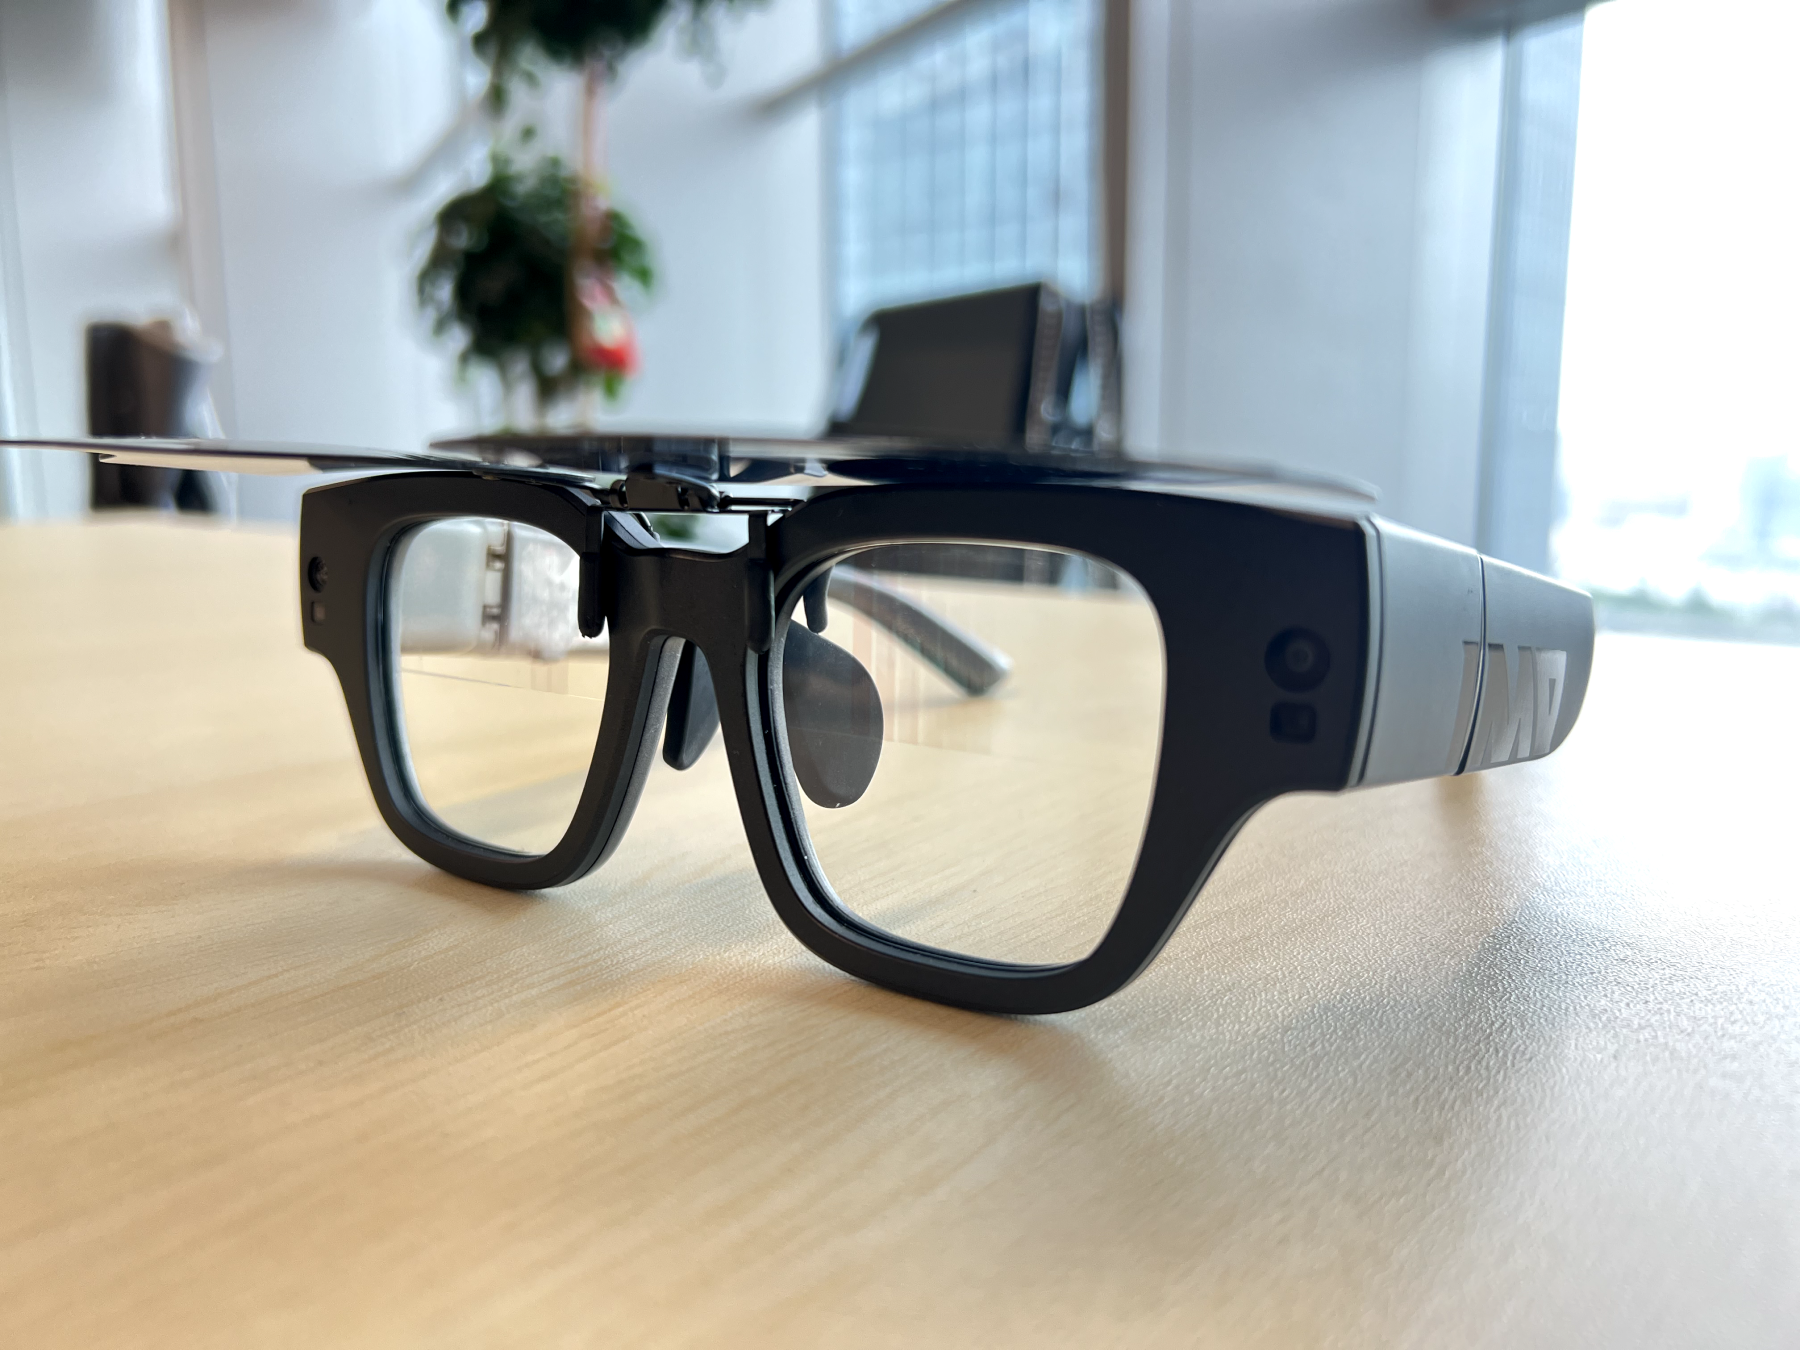 Nreal Air smart glasses review: A lightweight augmented reality